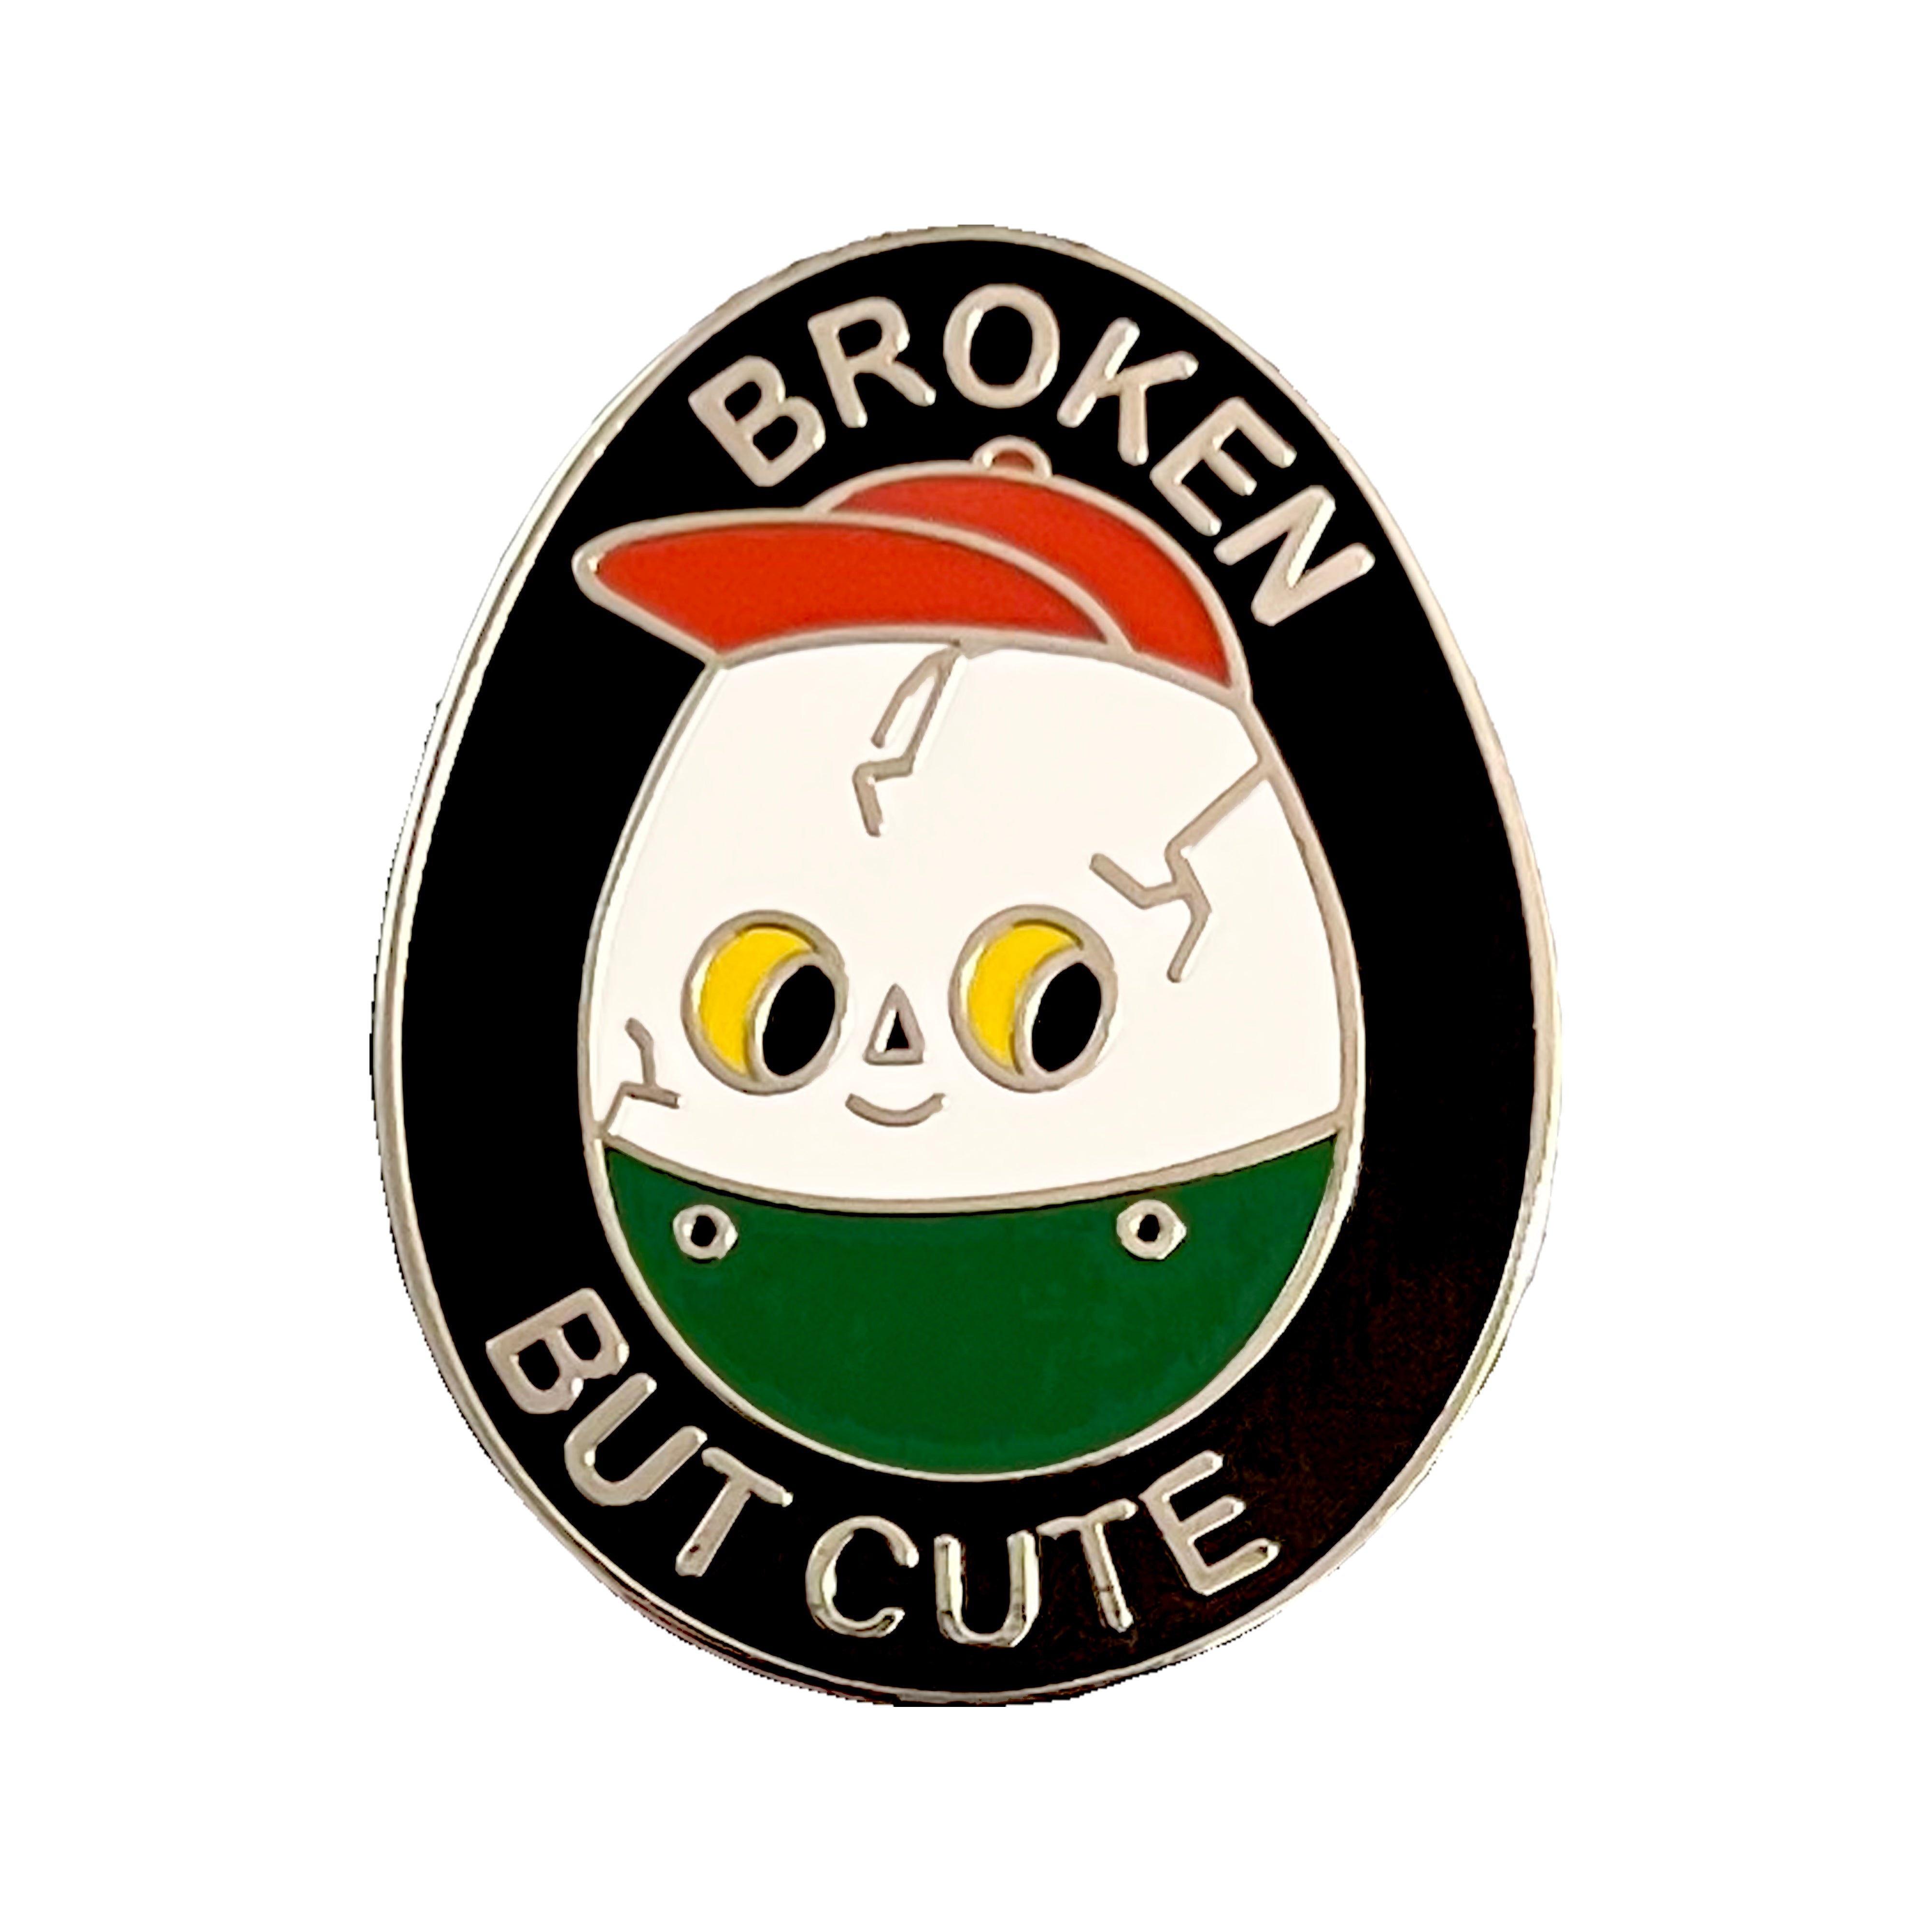 Broken But Cute Patch – Inner Decay